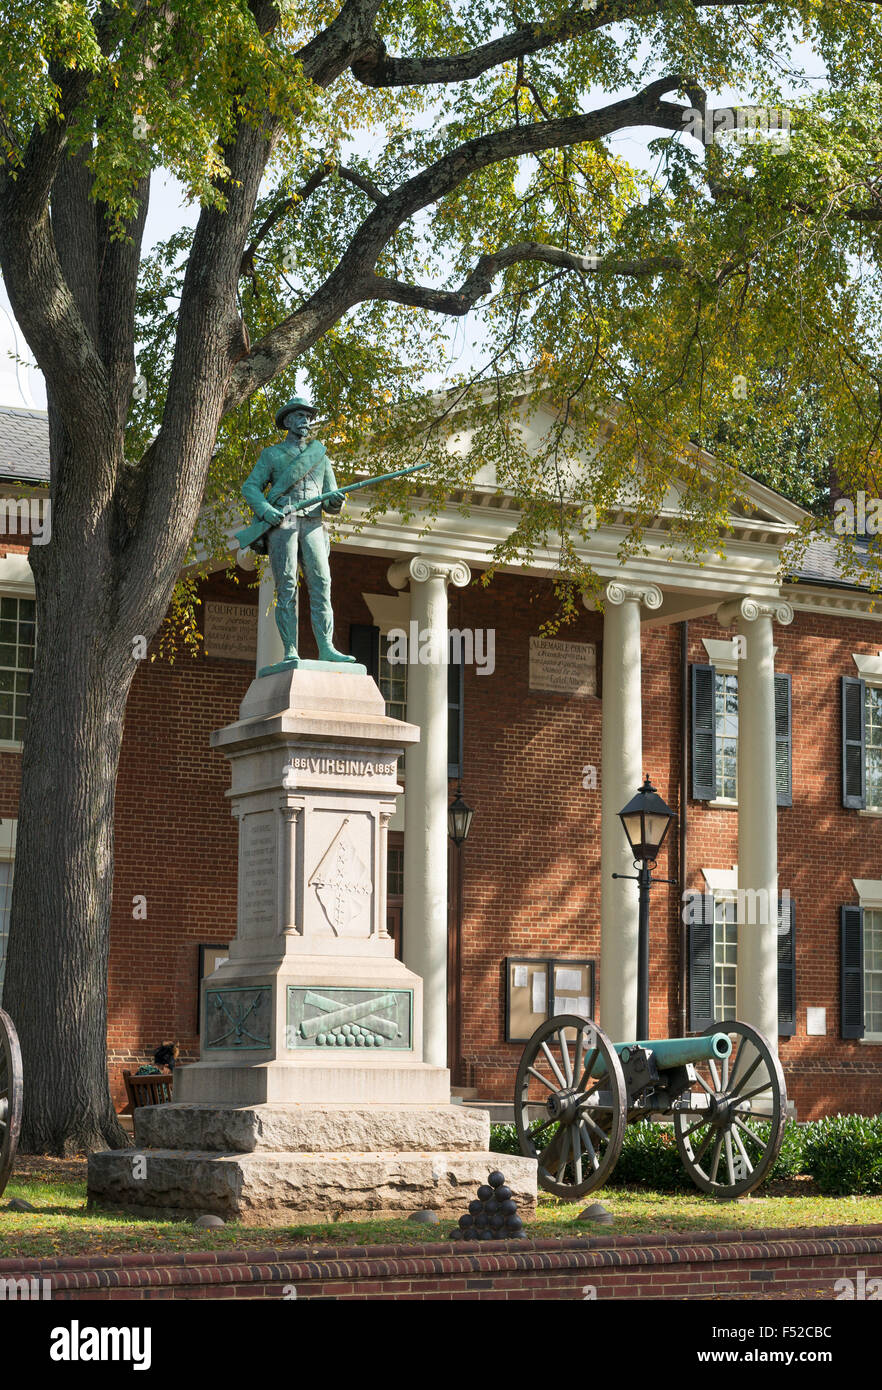 Confederate memorial statue et vieux Albemarle County Court House Charlottesville, Virginia, USA Banque D'Images